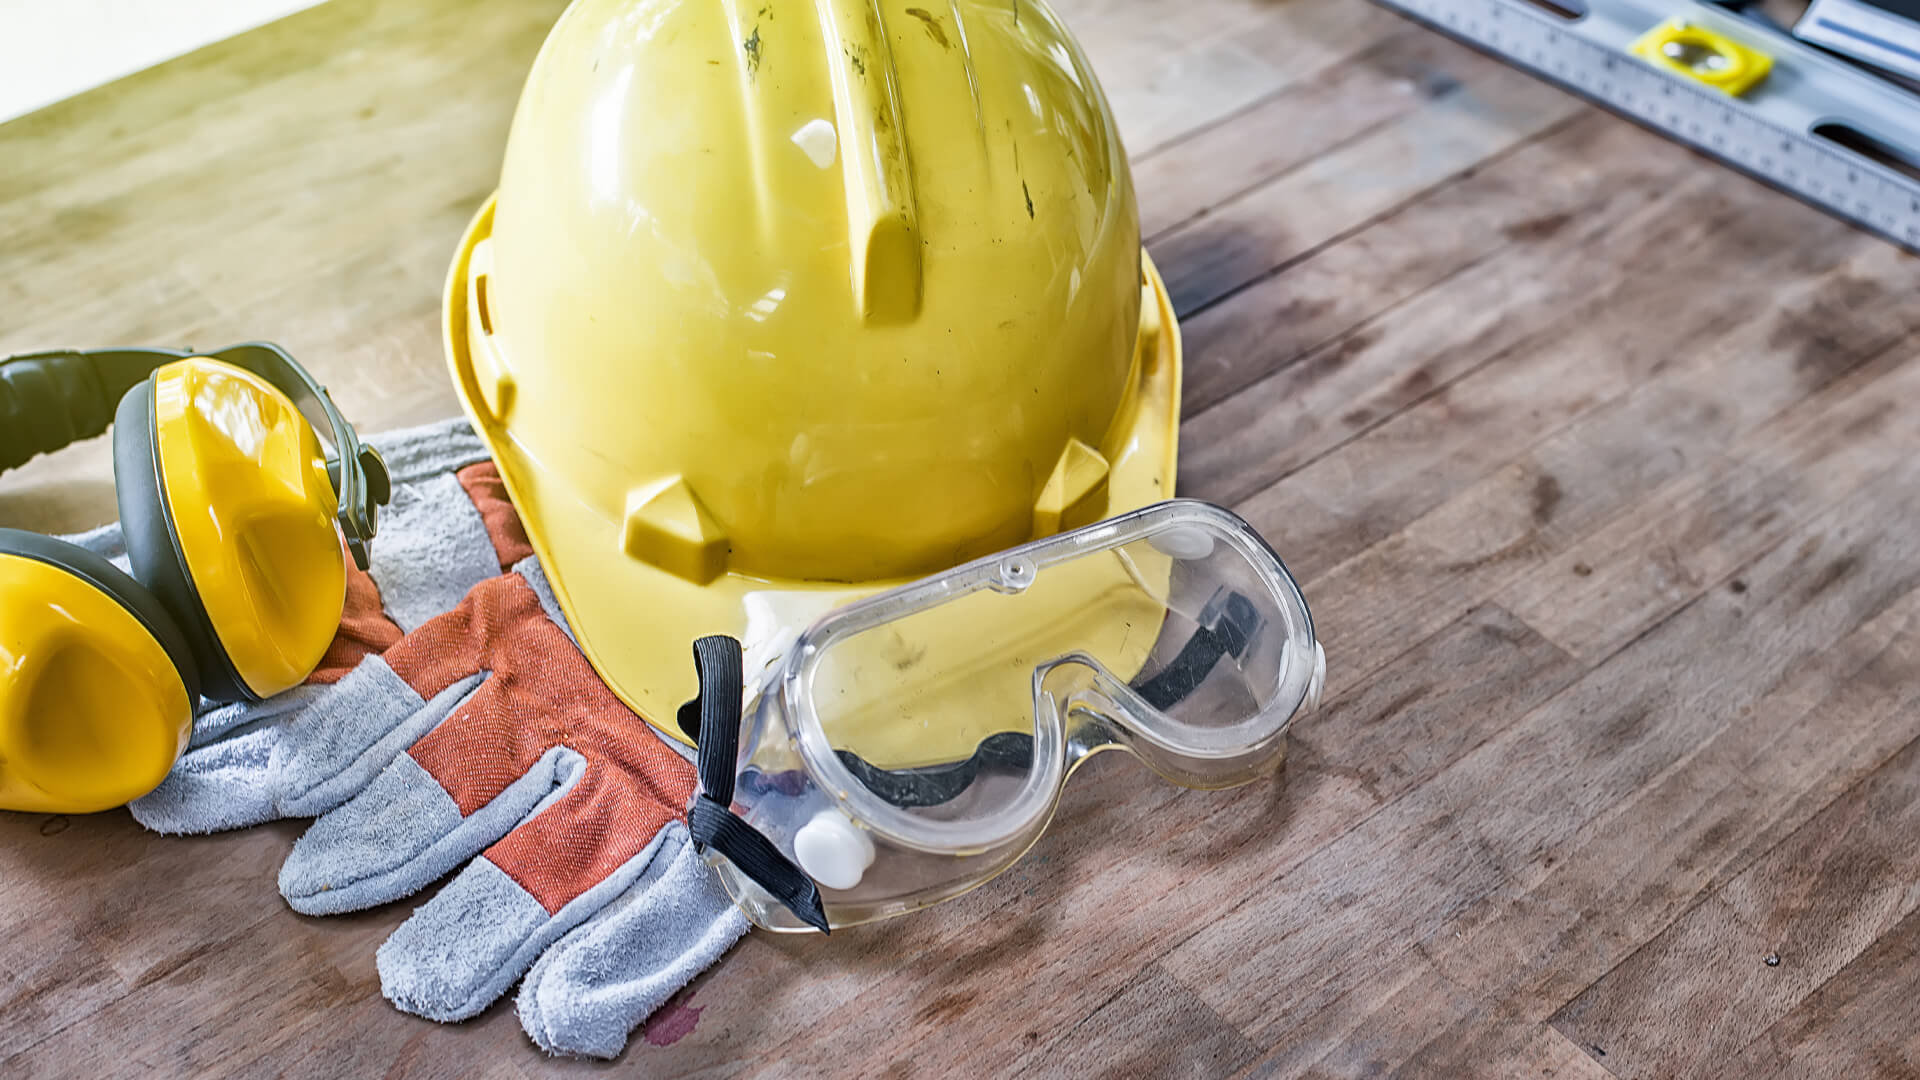 4 Reasons To Wear Protective Gear During Home Improvement - BUILD Magazine